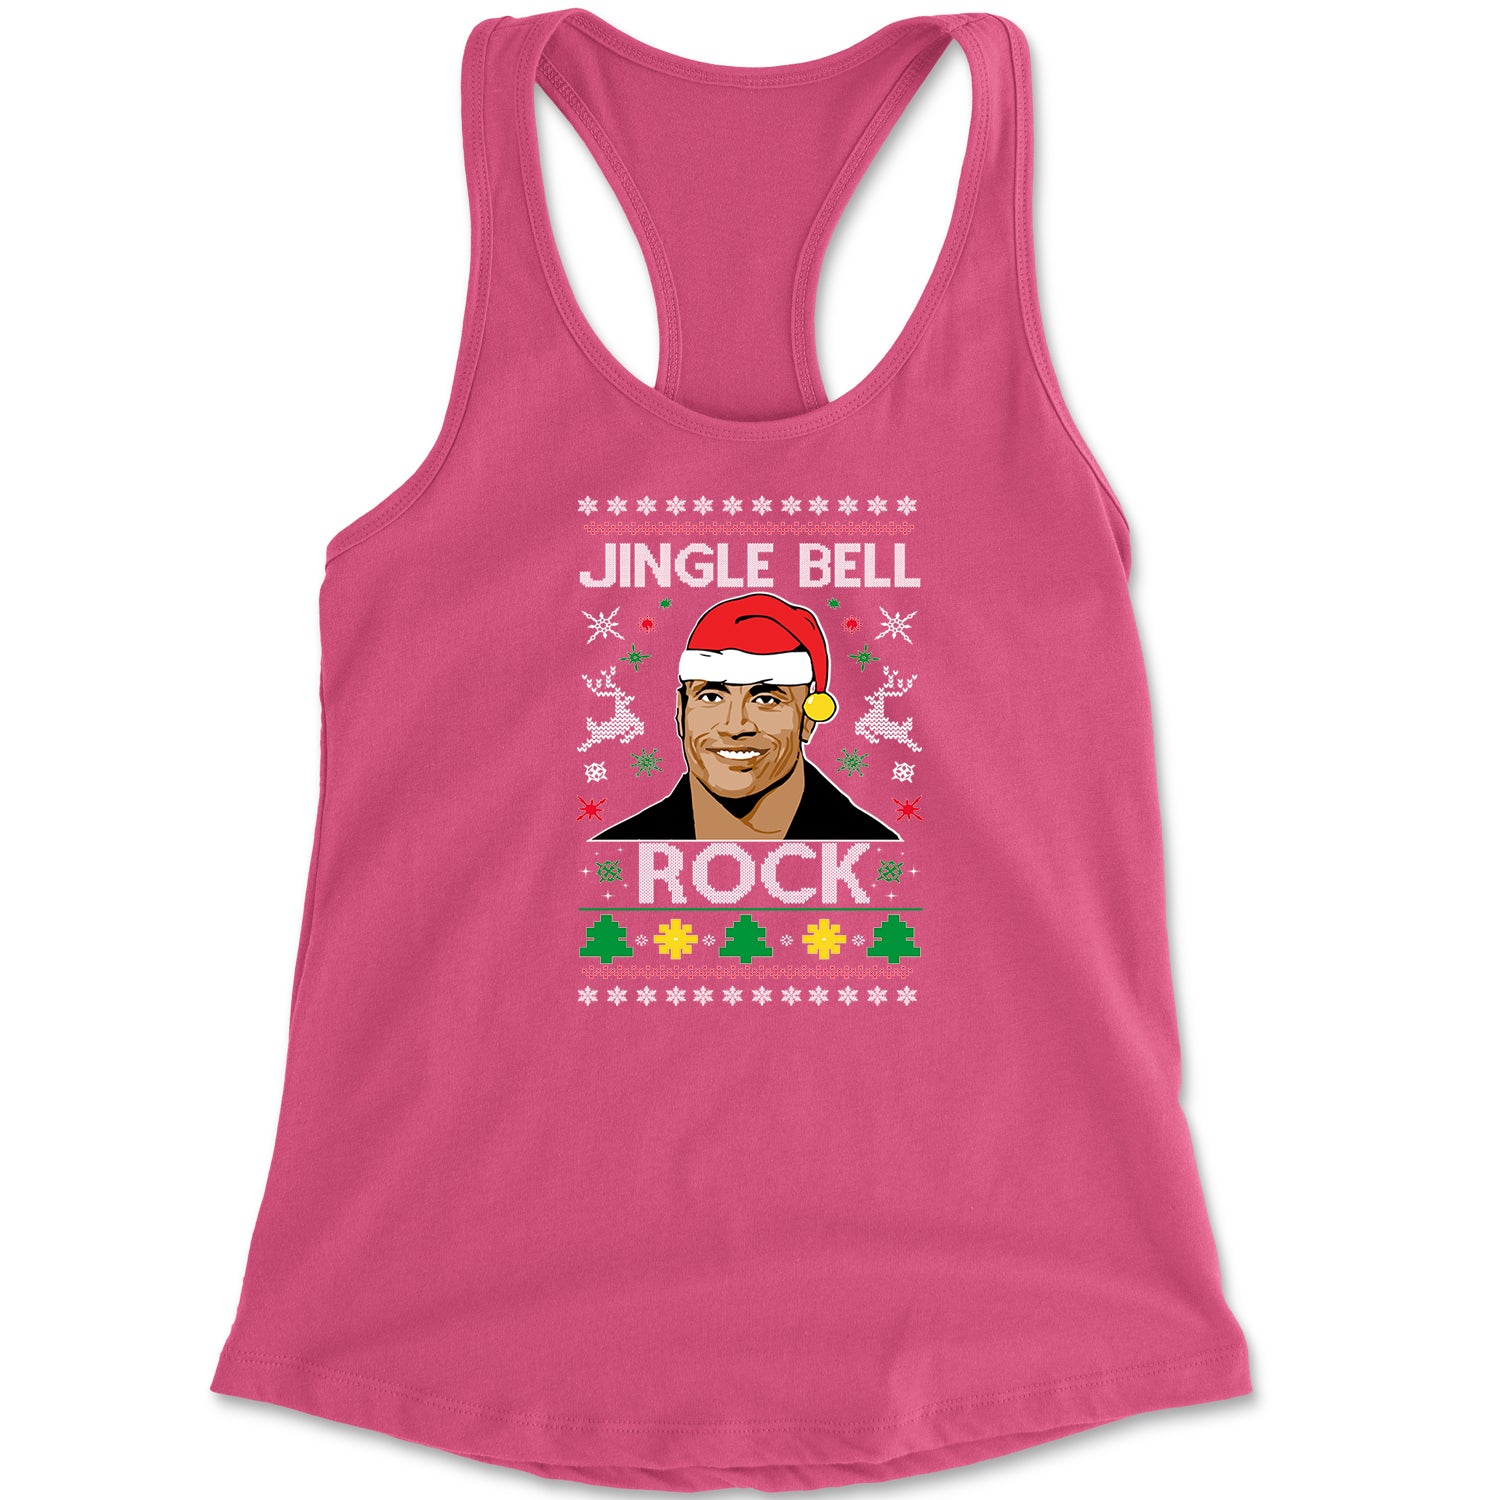 Jingle Bell Rock Ugly Christmas Racerback Tank Top for Women 2018, champ, Christmas, dwayne, johnson, peoples, rock, Sweatshirts, the, Ugly by Expression Tees